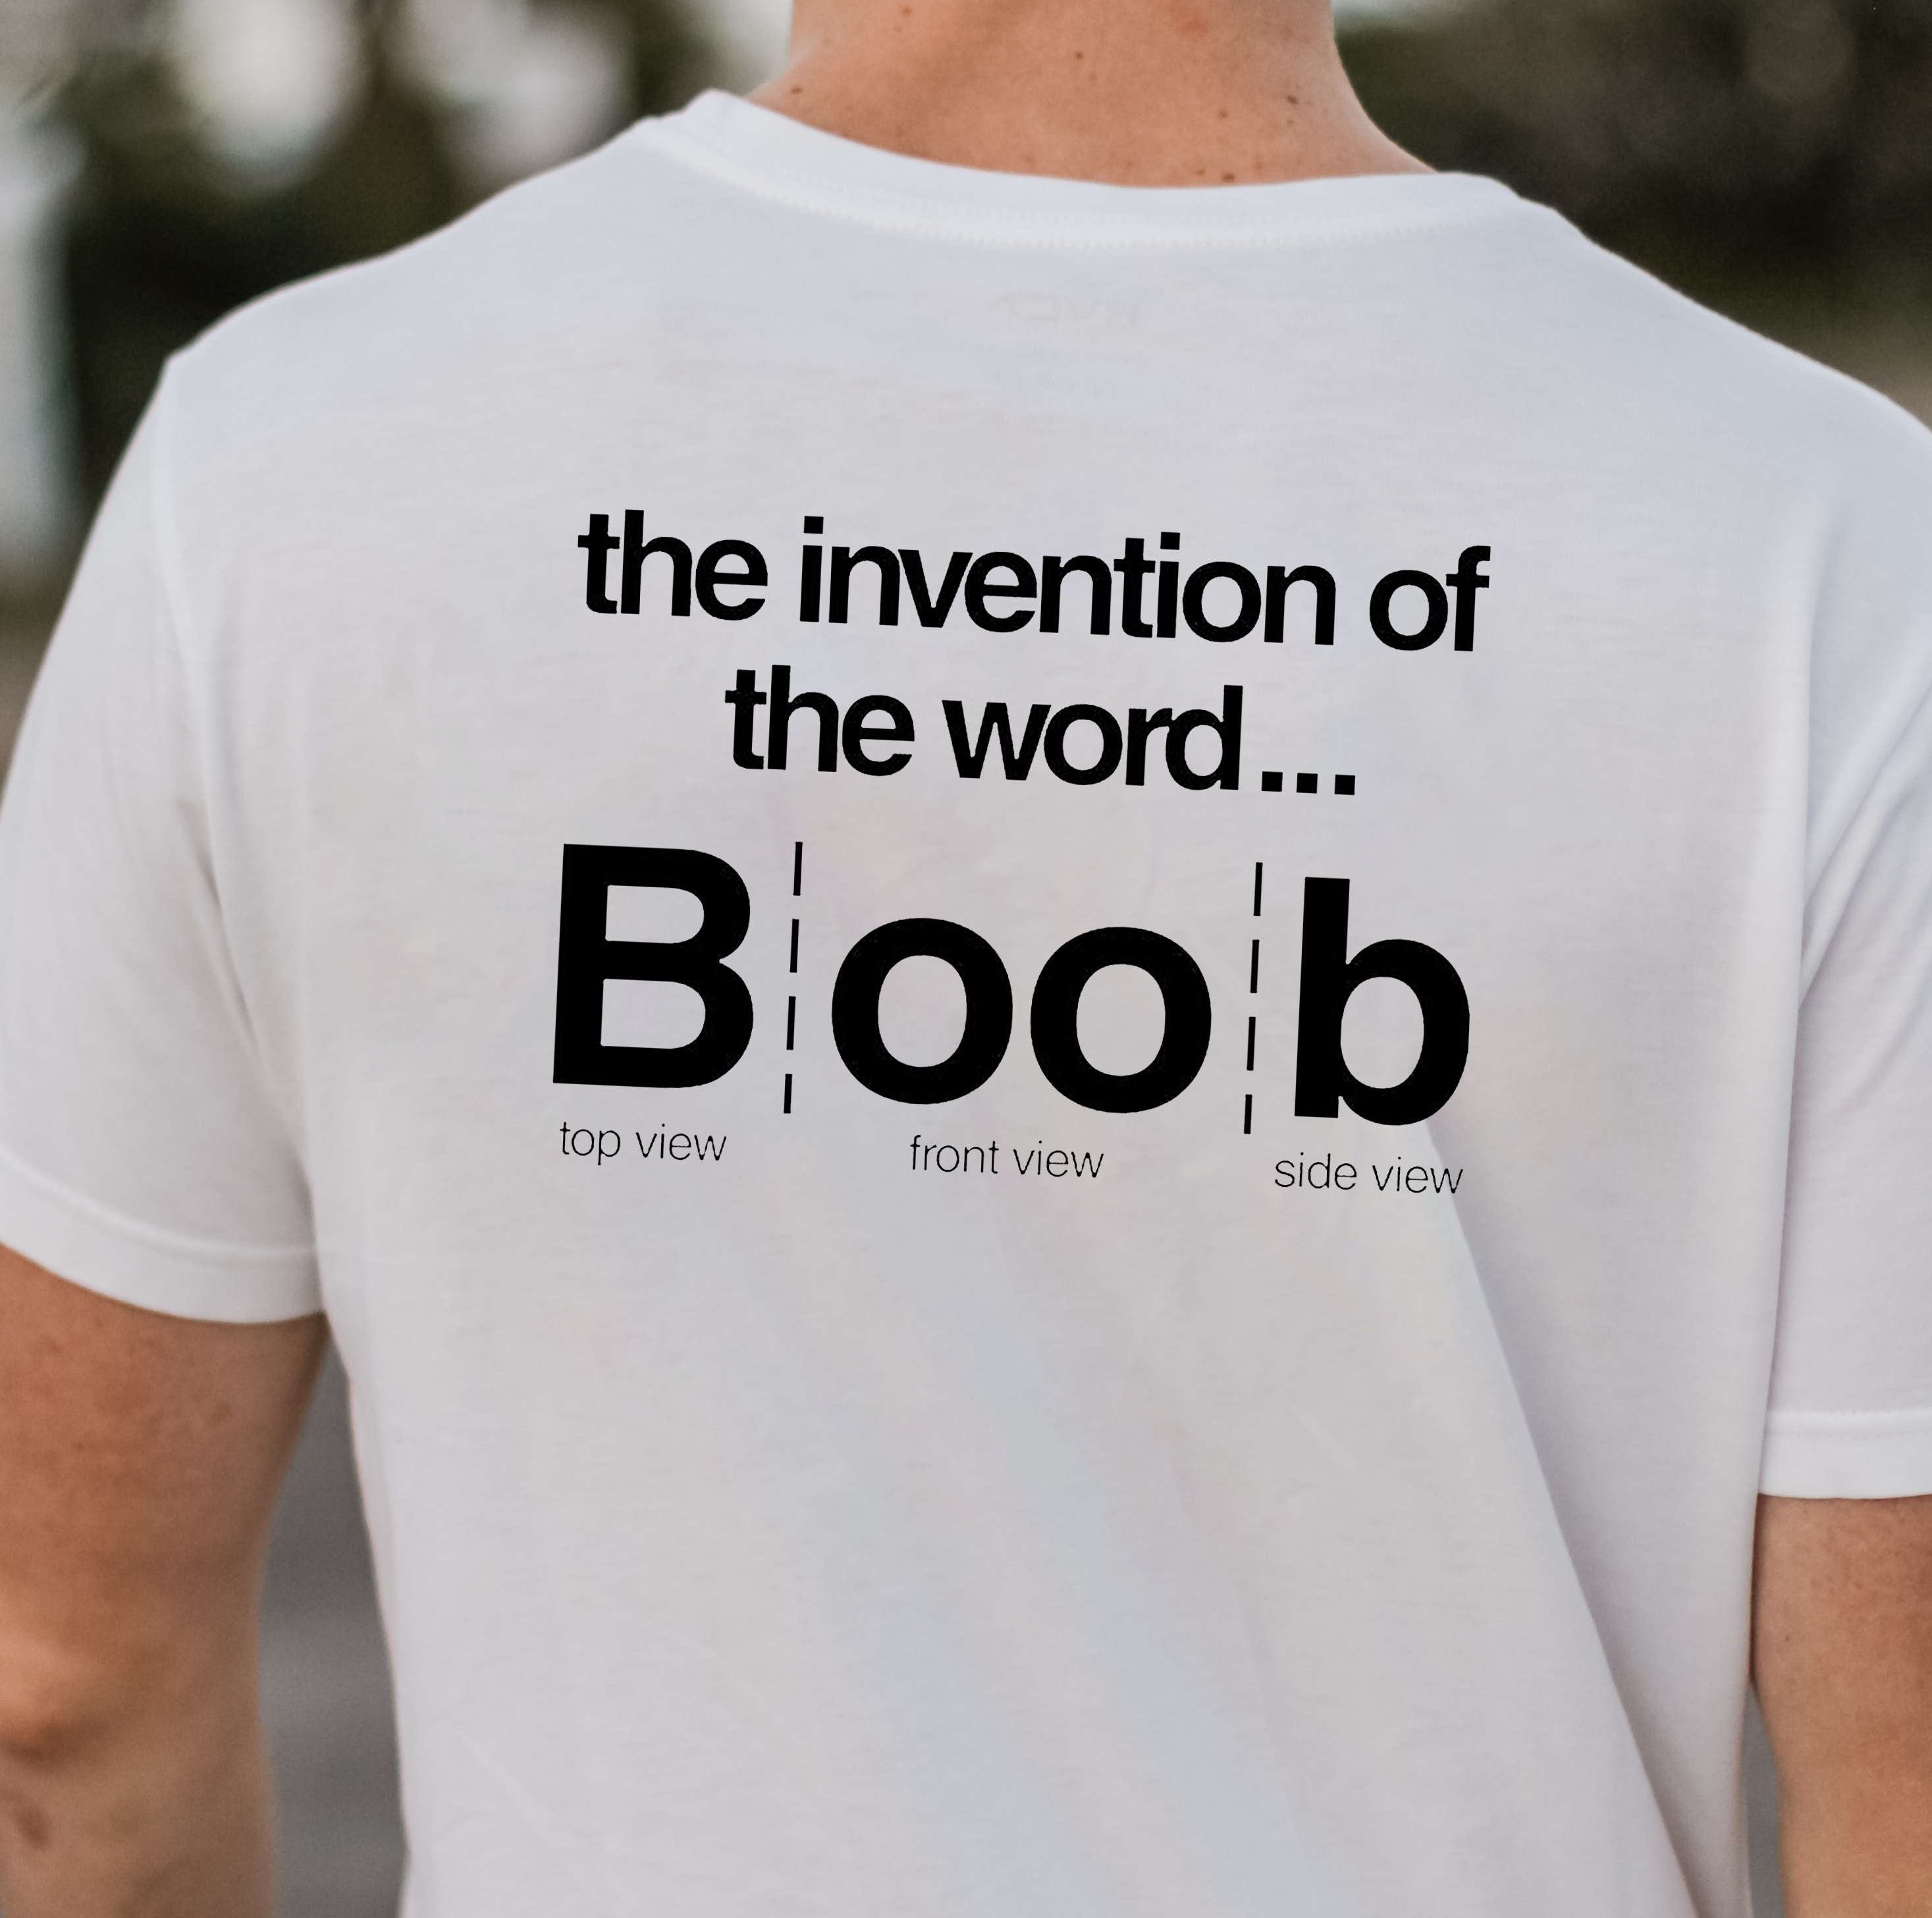 The invention of the word.. Boob – shopmyeyes